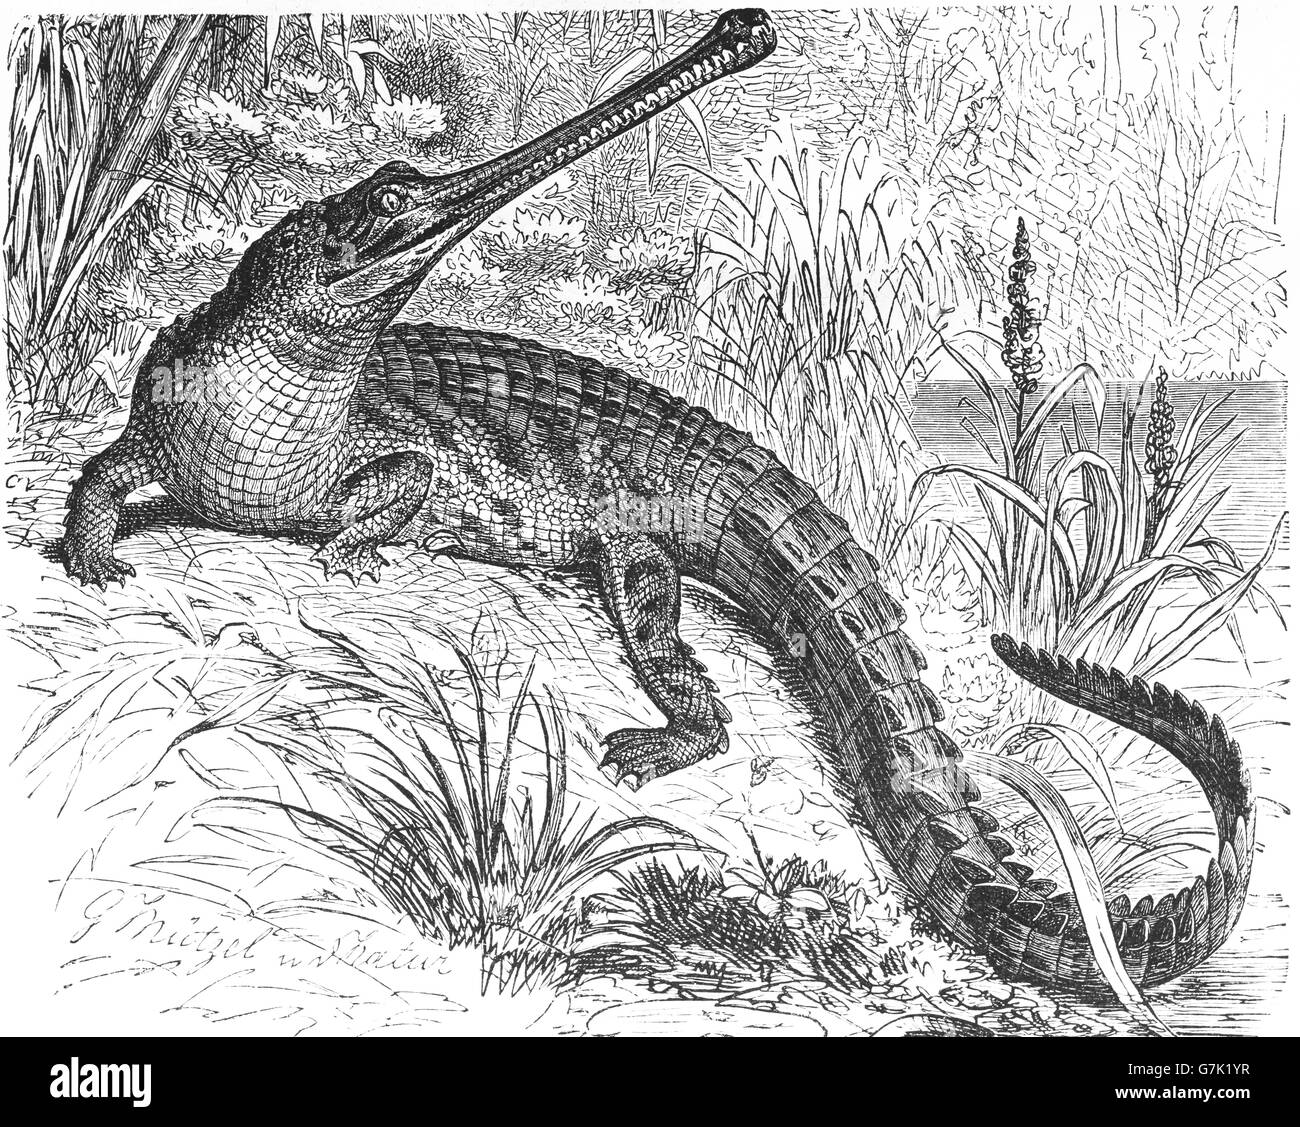 Gharial, gavial, fish-eating crocodile, Gavialis gangeticus, illustration from book dated 1904 Stock Photo